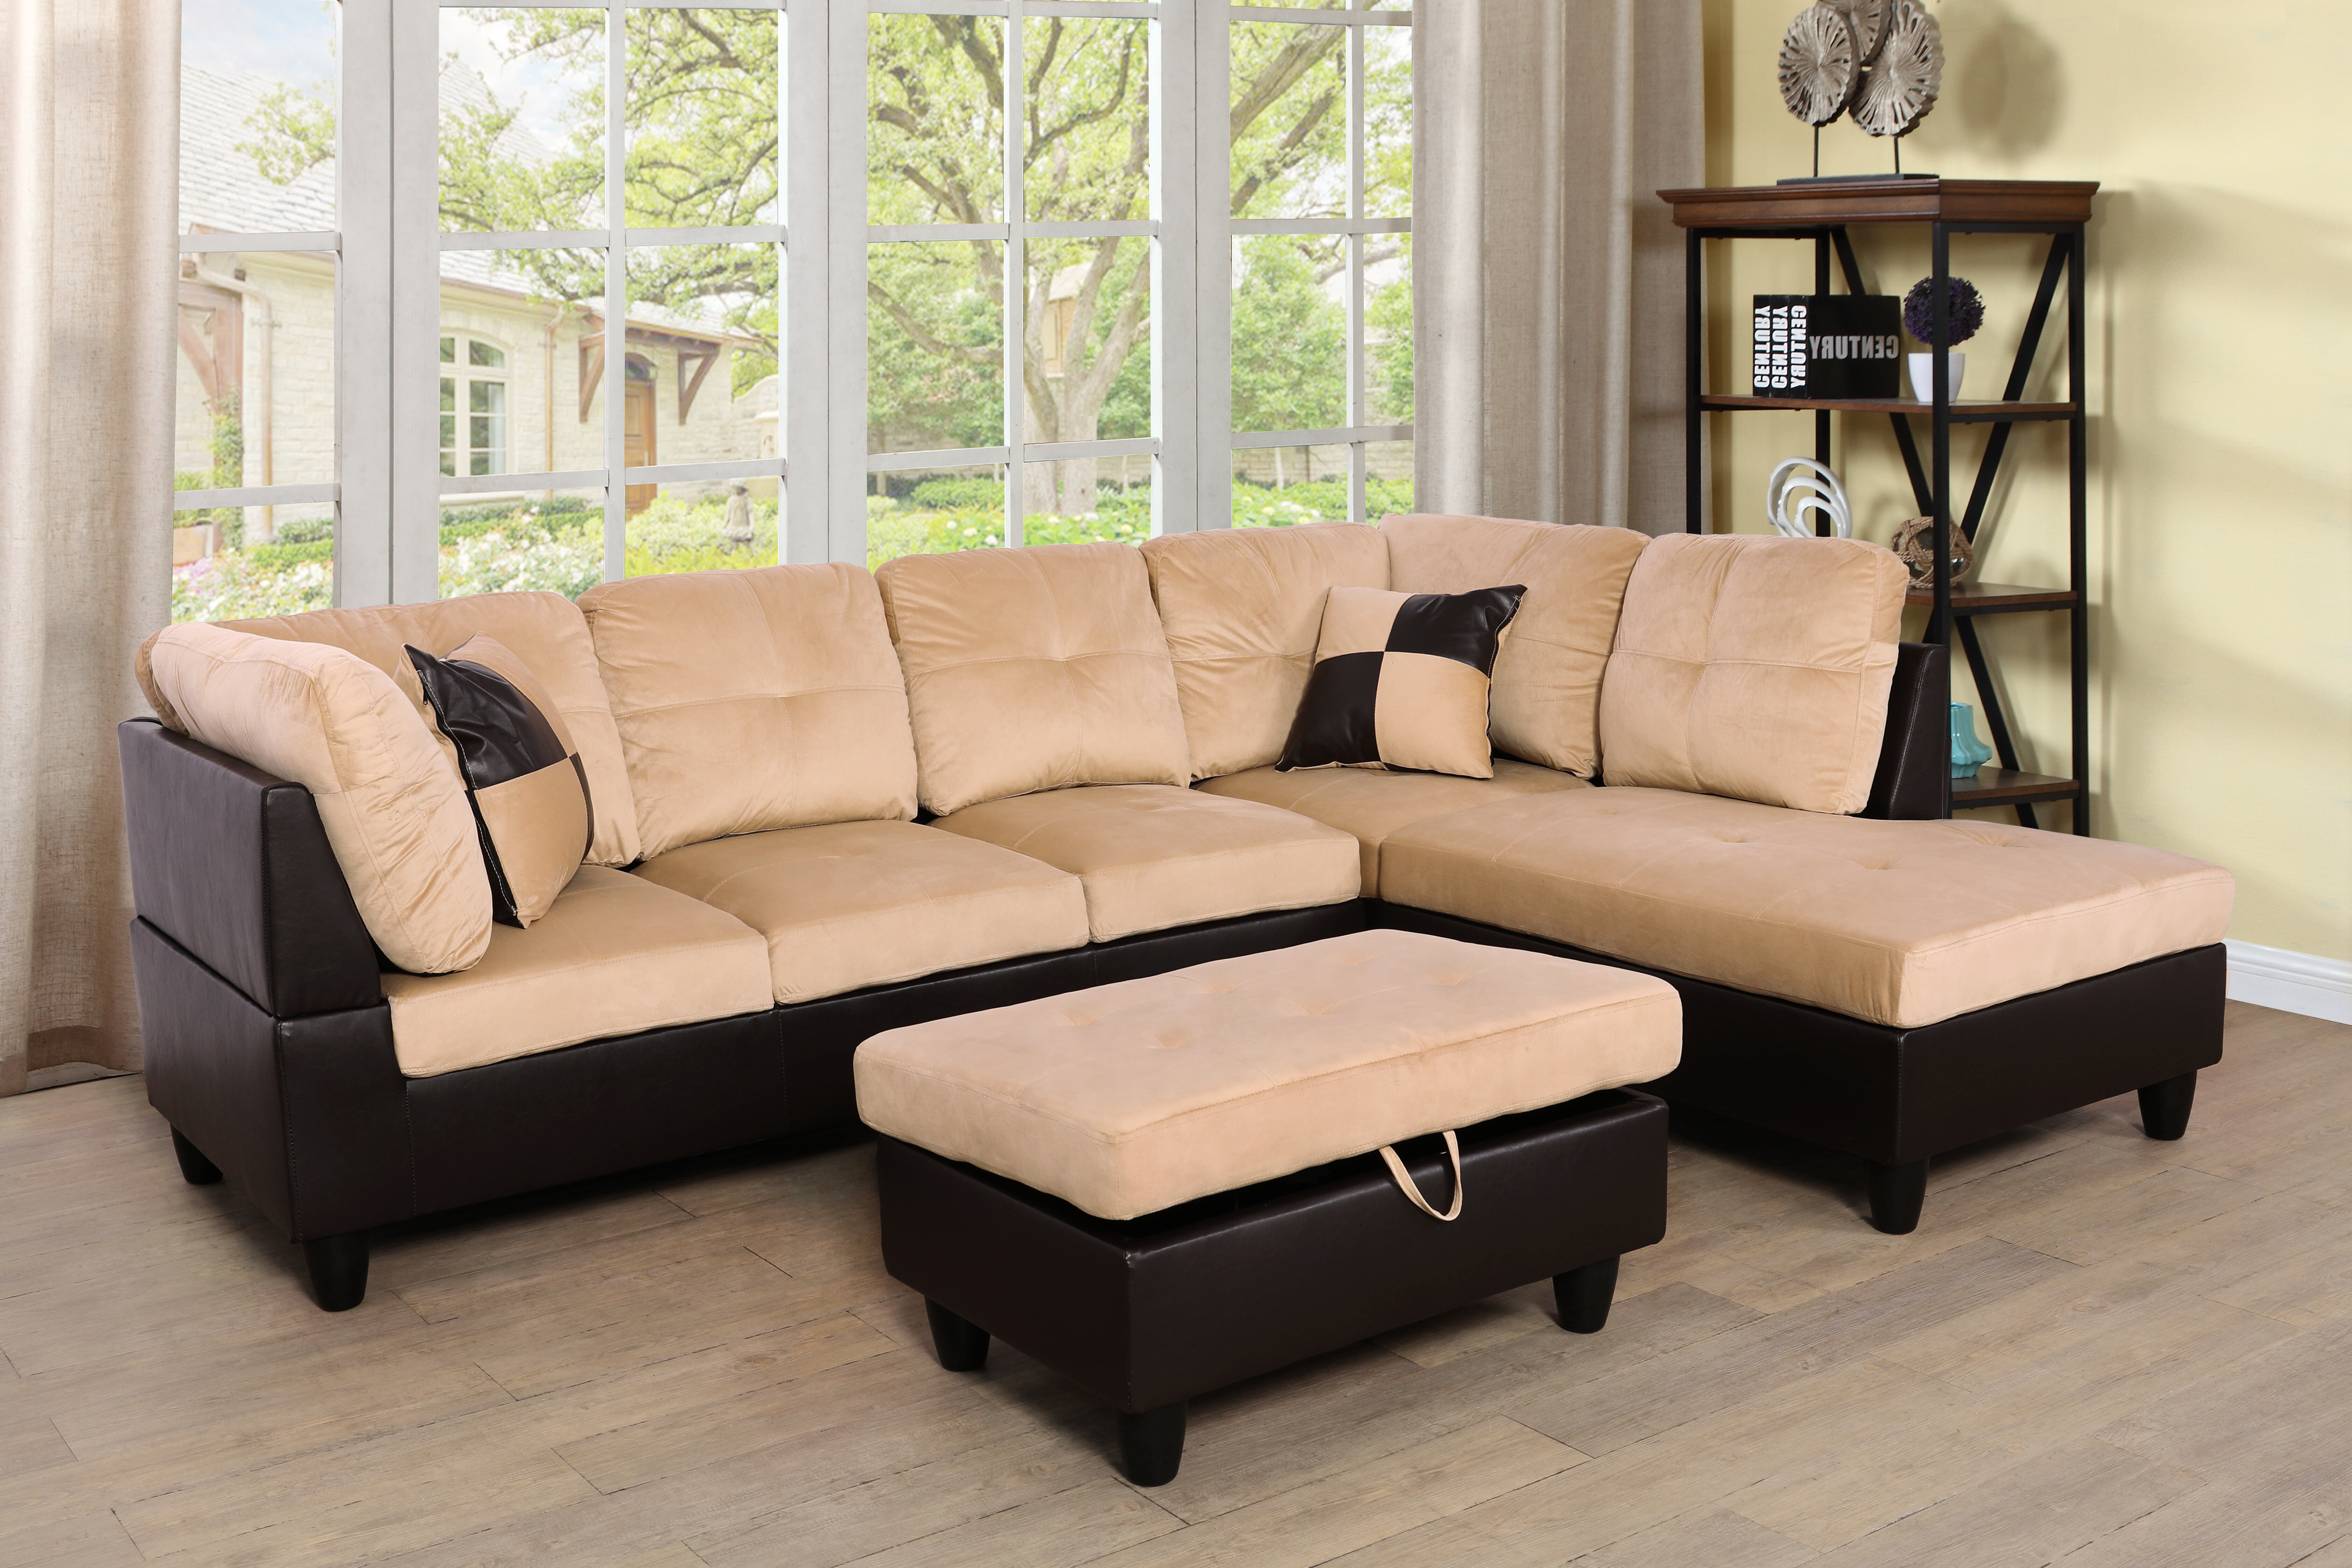  BEN'SHOME® Sectional Couch Cushion Support - Sofa